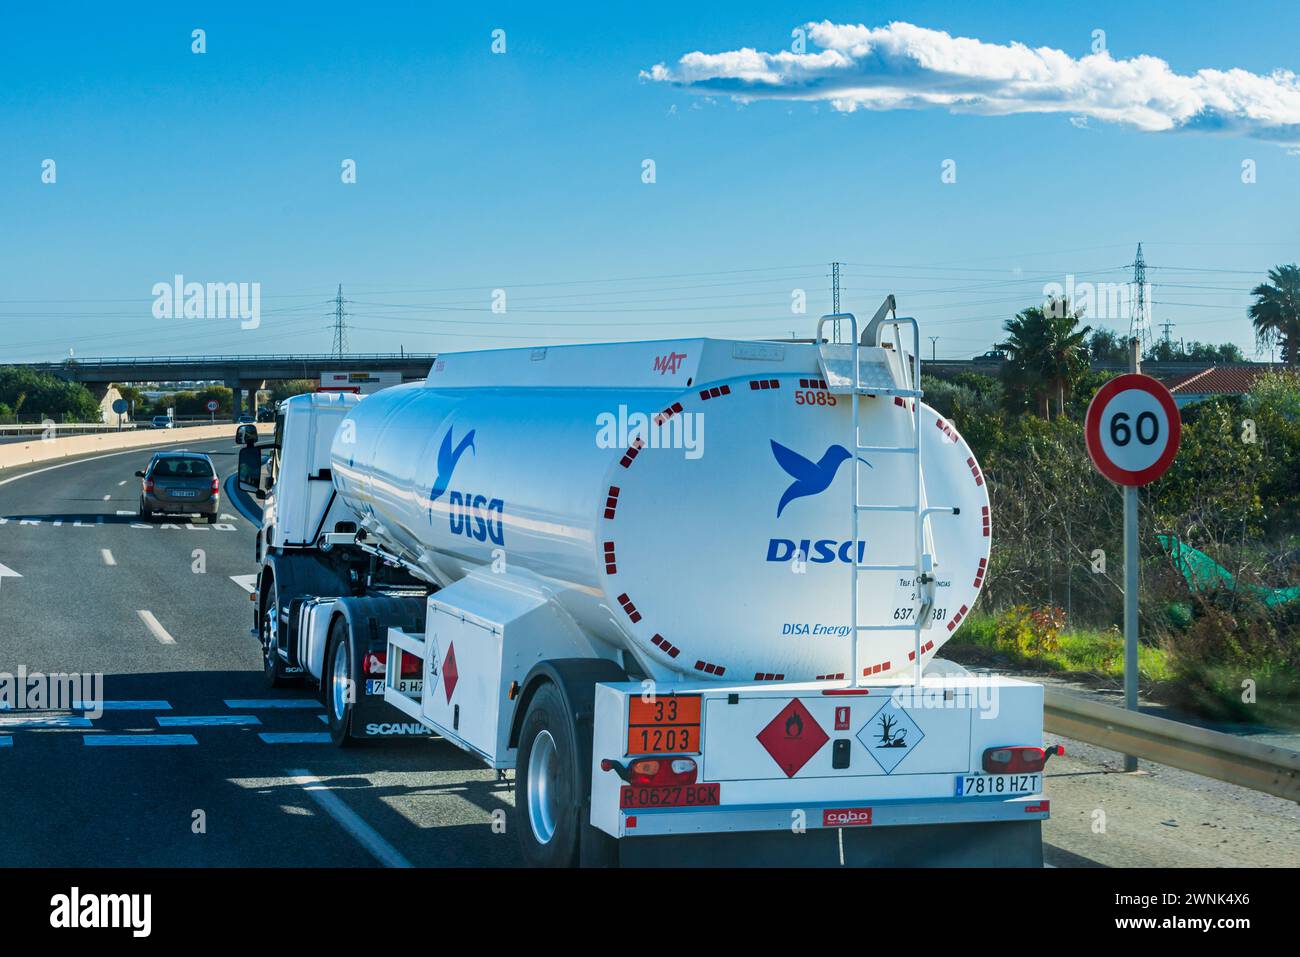 Single-axle fuel tanker truck from the Disa oil company traveling on the highway. Stock Photo